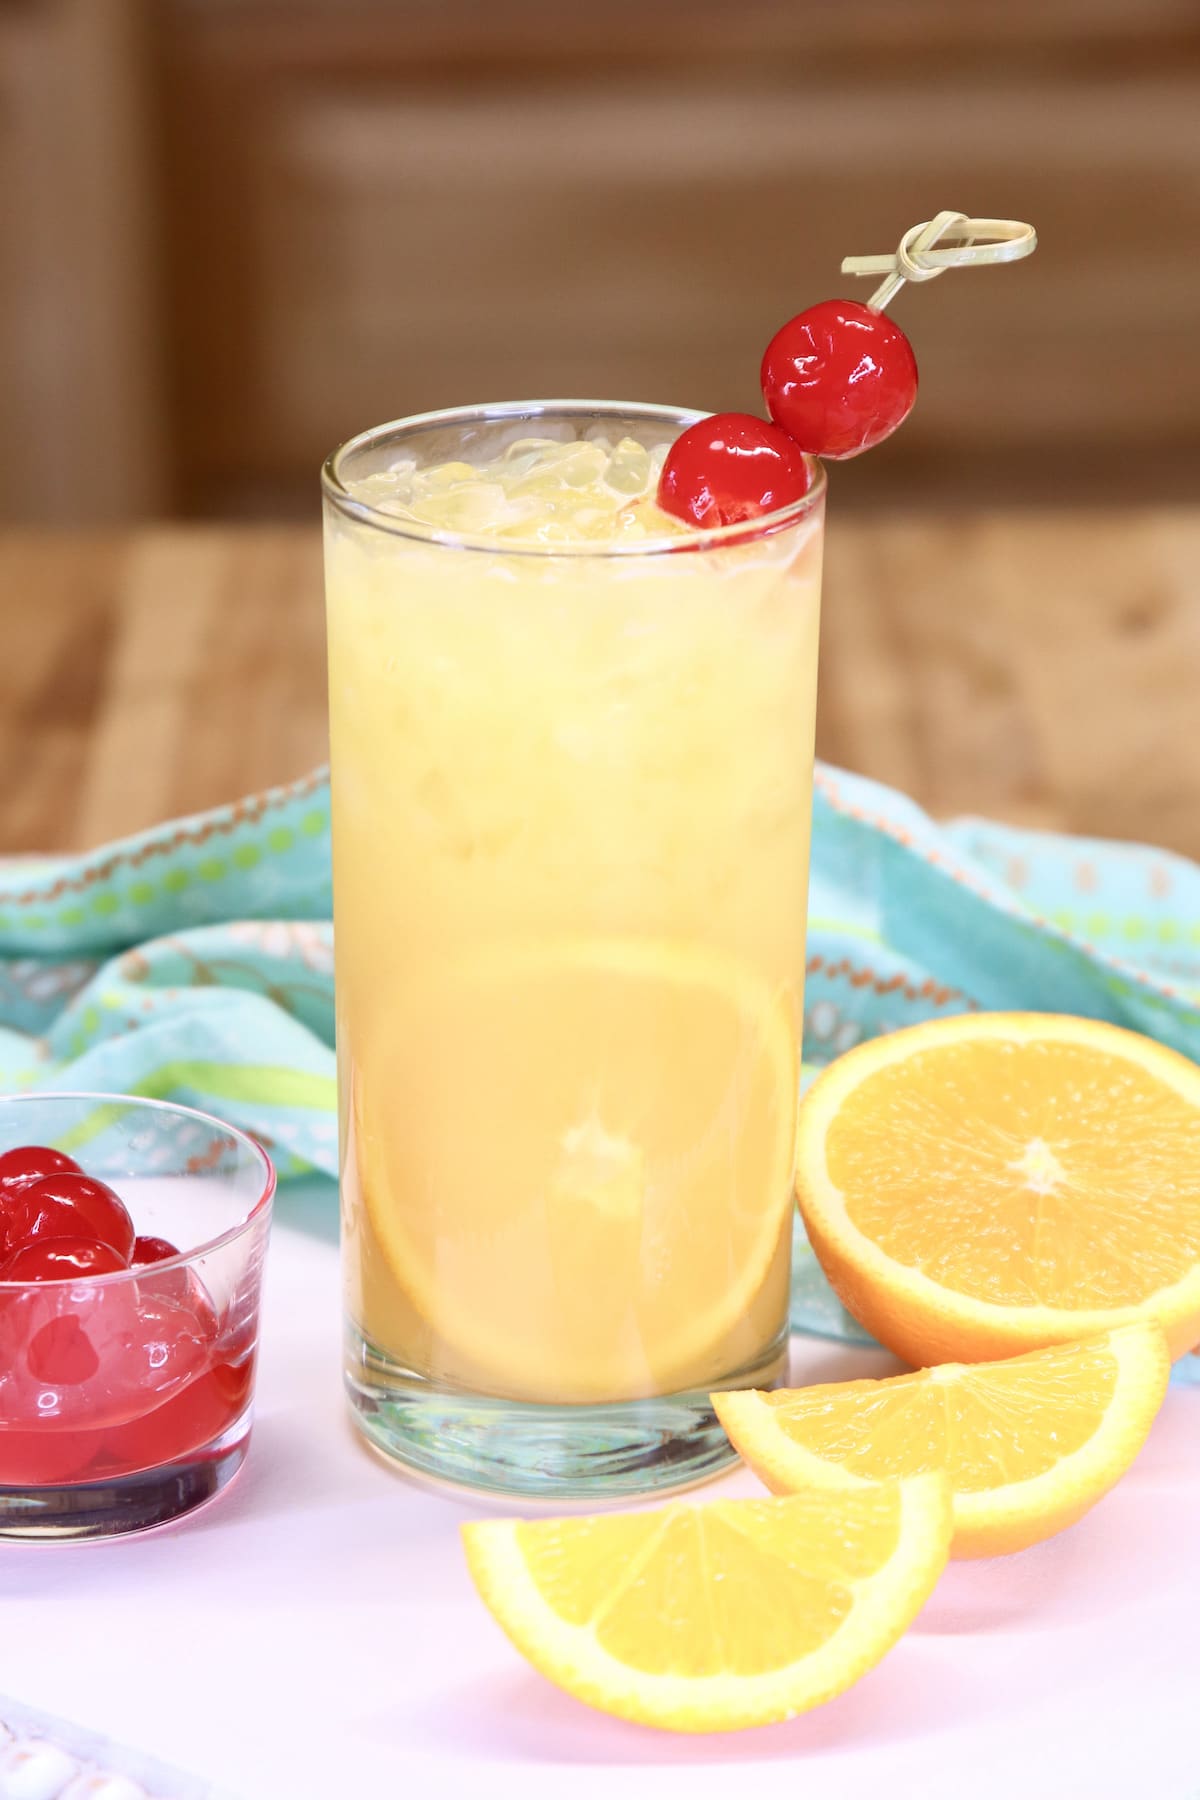 glass of orange juice cocktail with orange and cherry garnishes.